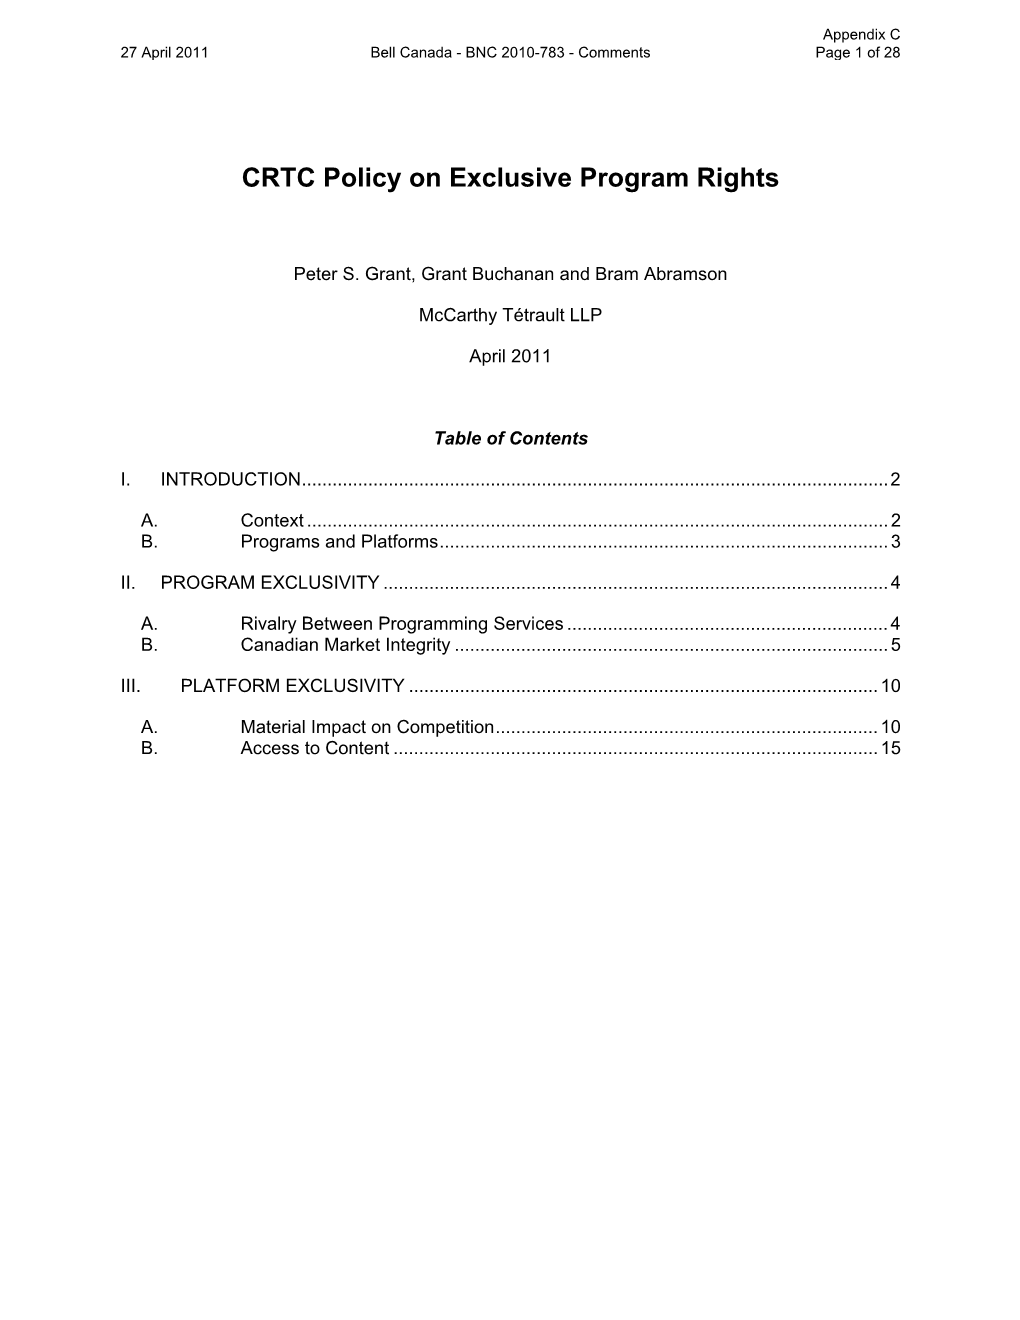 CRTC Policy on Exclusive Program Rights